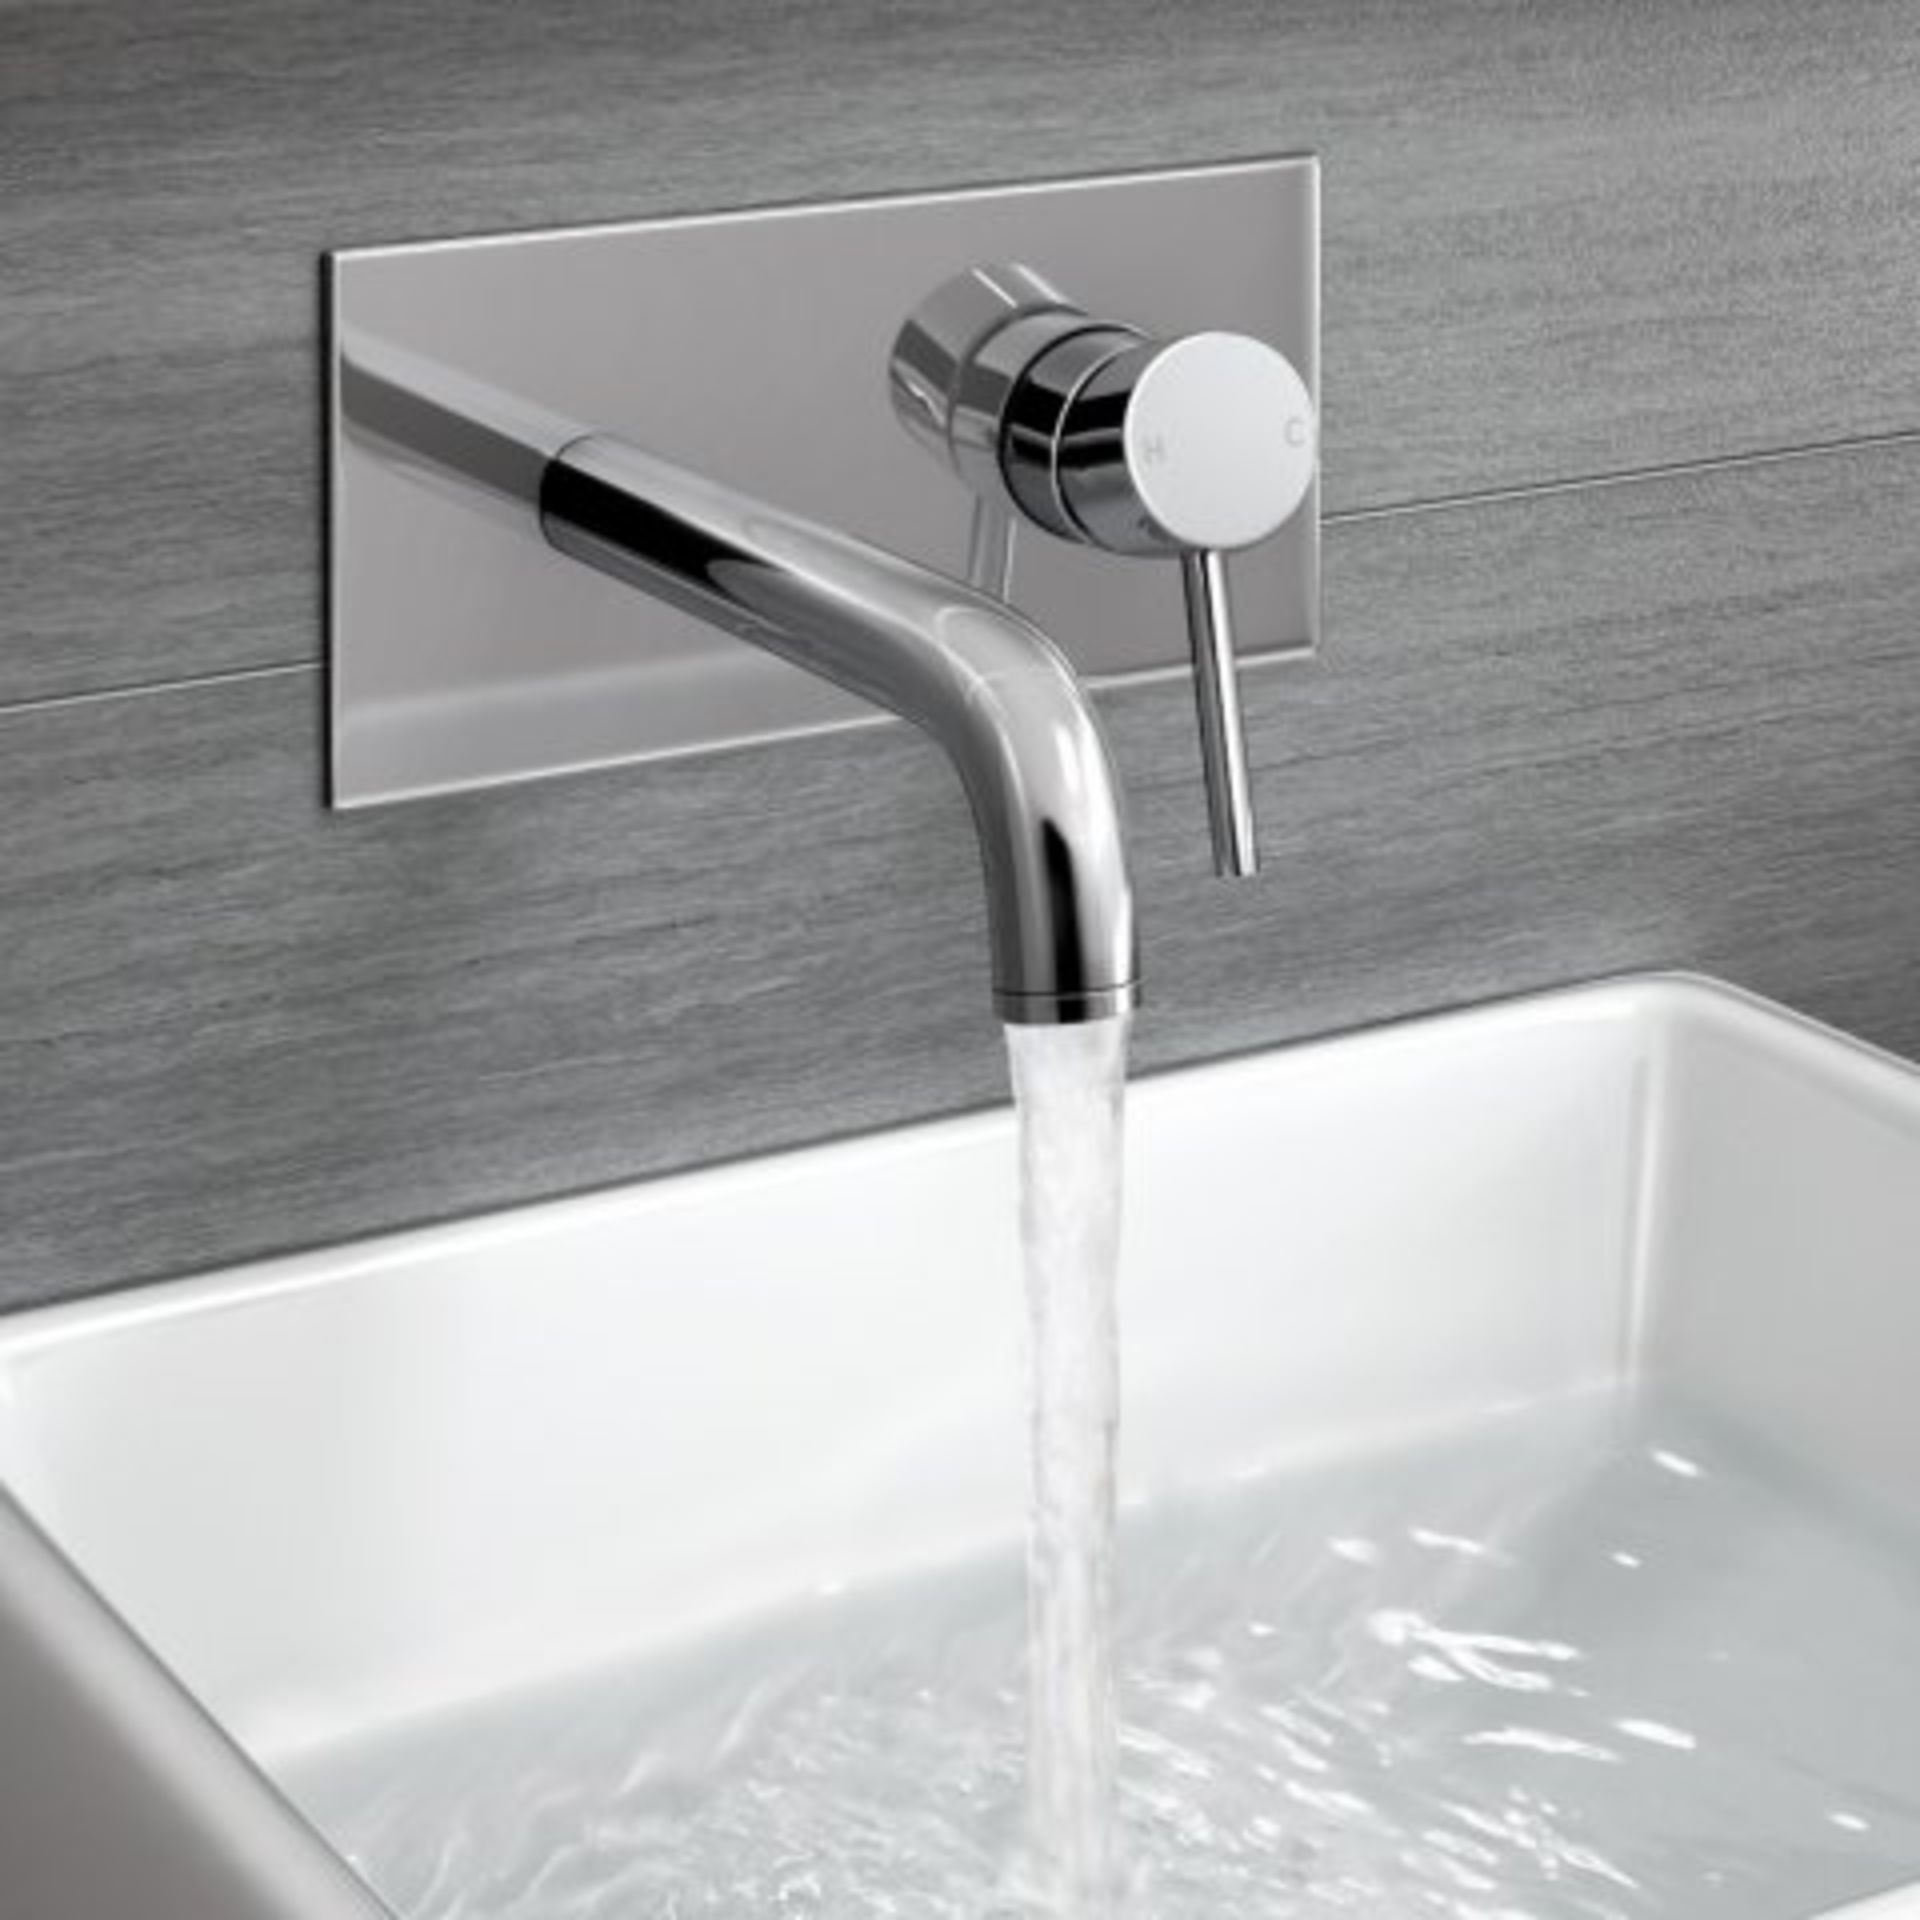 (I59) Gladstone Wall Mounted Basin Mixer Our Gladstone Range of taps are thoughtfully designed to